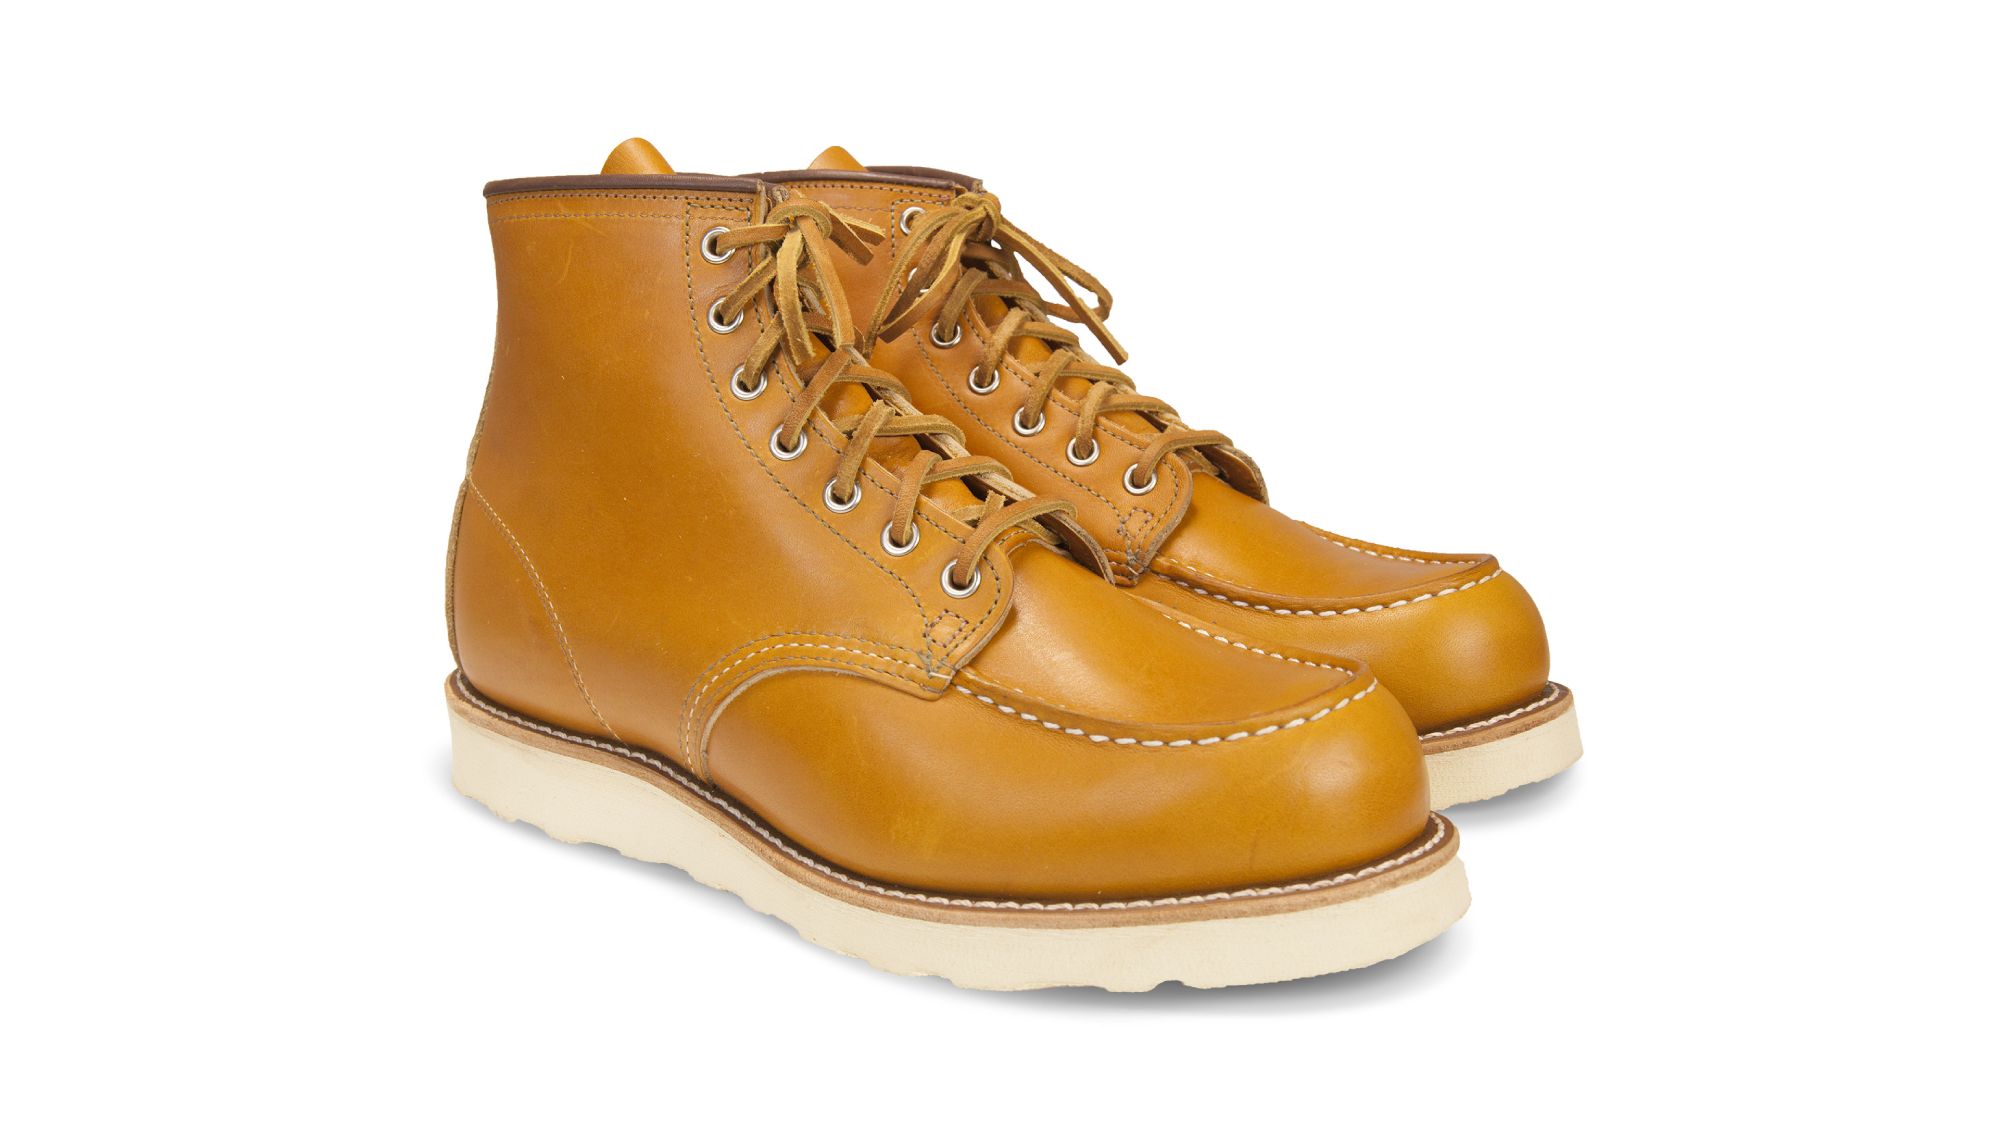 Shop the Moc Toe 9875 EE | Official Red Wing Shoes Online Store